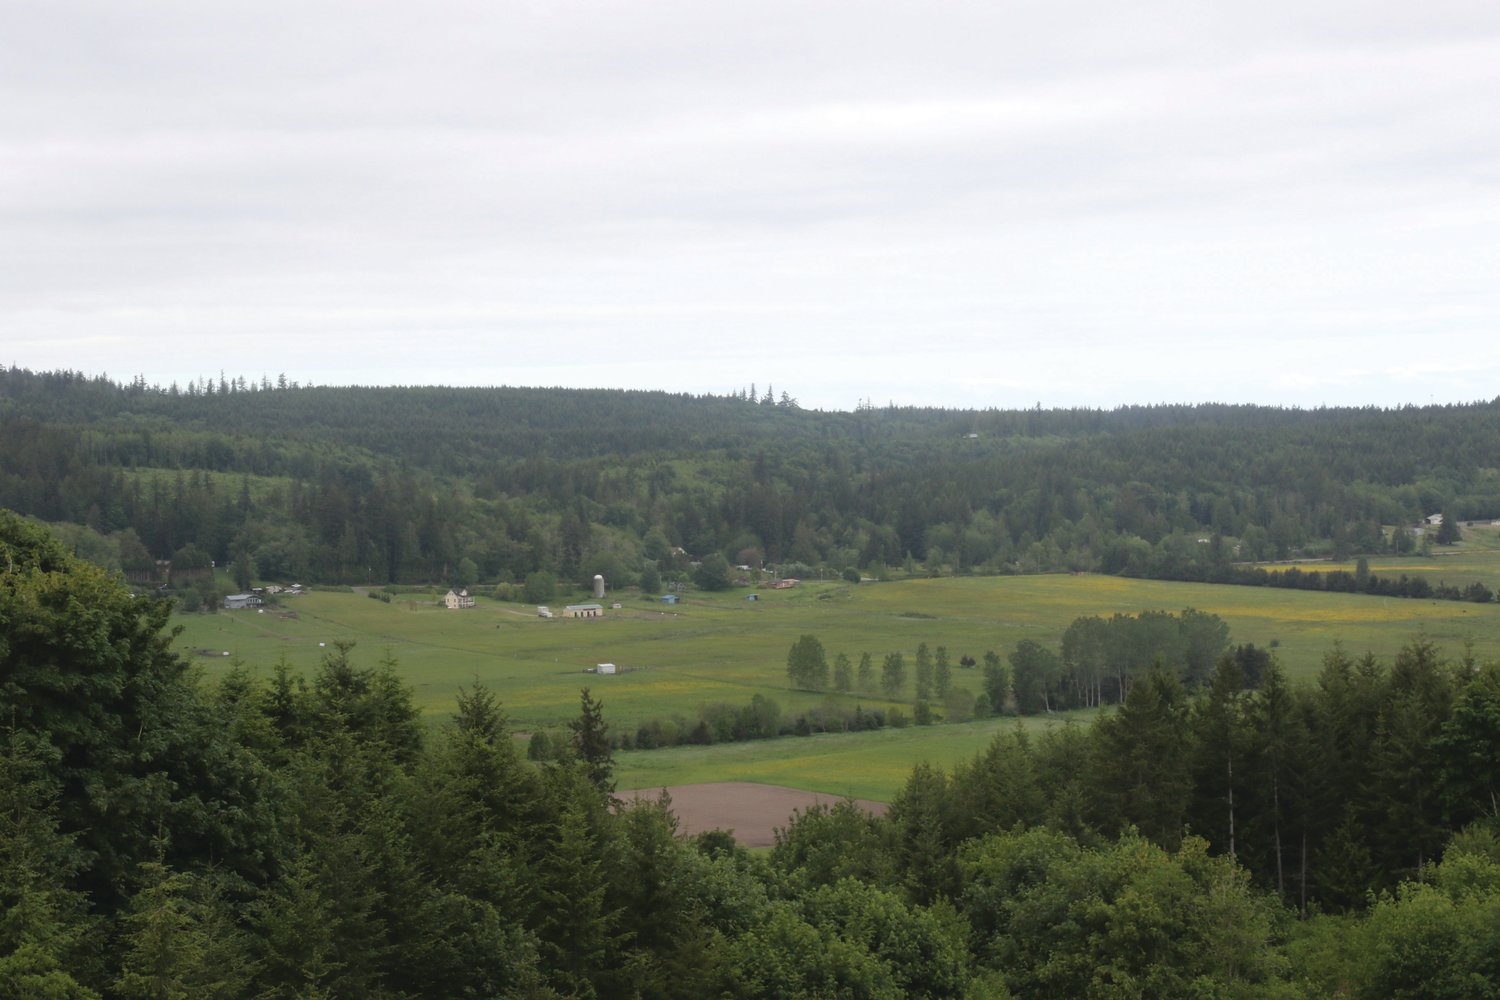 The view from a lookout within the Chimacum Ridge Community Forest boasts a sweeping view of farmlands along Center Road.